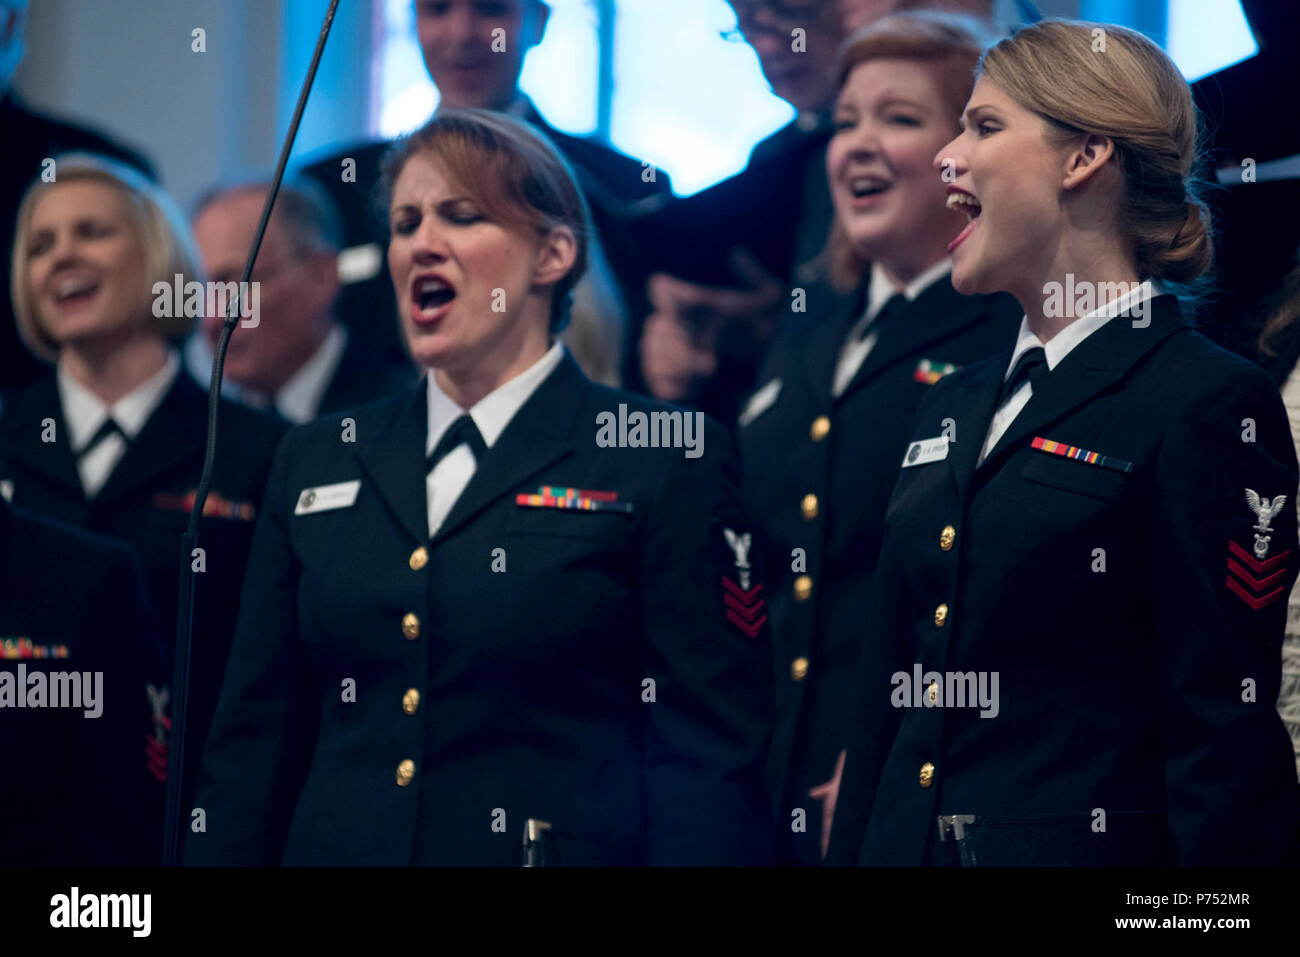 ANNANDALE, VIRGINIA  (October 30, 2016) Petty Officers 1st Class Maia Rodriguez, left and Chelsi Ervein, as they perform with the U.S. Navy Band Sea Chanters chorus during the chourus' 60th anniversary concert. The Sea Chanters chorus celebrated their 60th anniversary iin Annandale, Virginia, with a concert featuring alumni from the group. The chorus was formed as an all-male group in 1956 and tasked with perpetuating the songs of the sea. In 1980, the group added women to their ranks and expanded their repertoire to include everything from Brahms to Broadway. Stock Photo